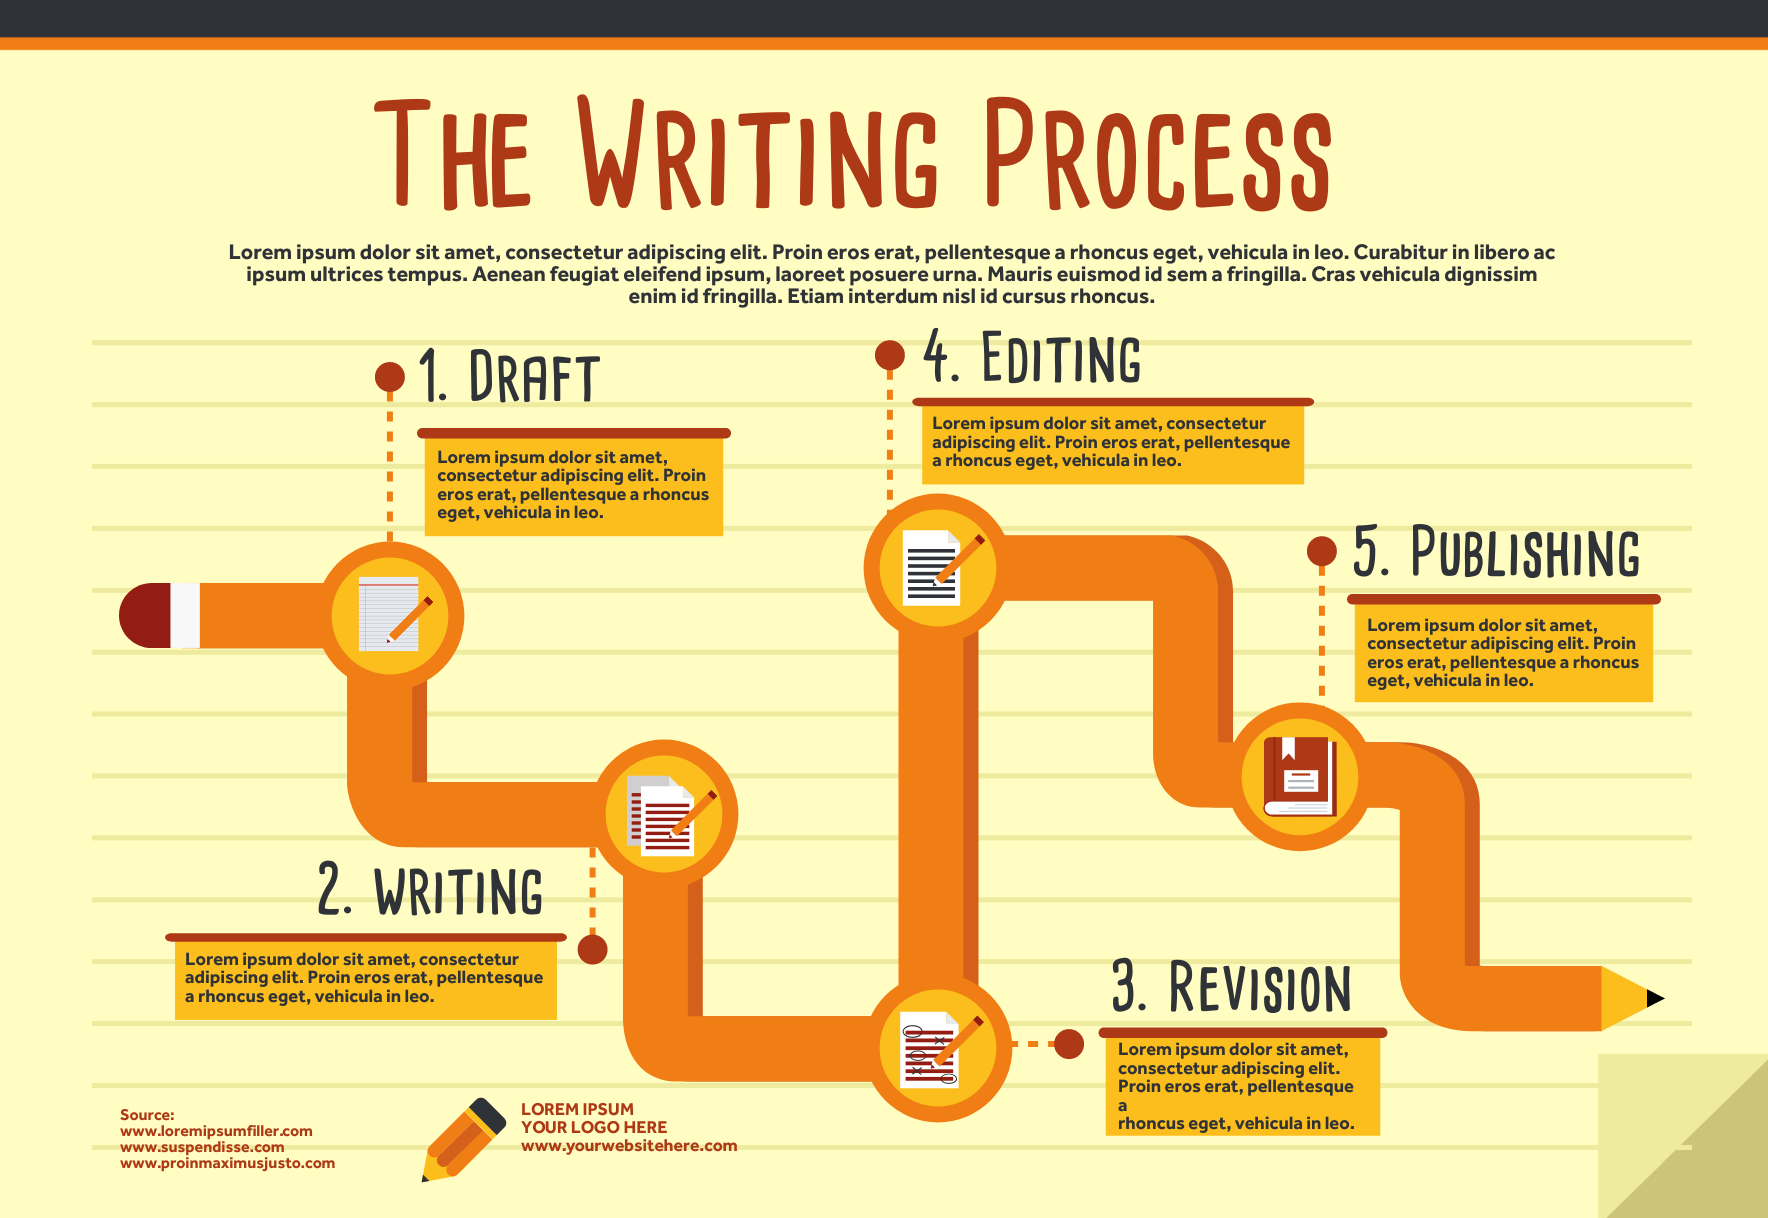 write an essay about your writing process